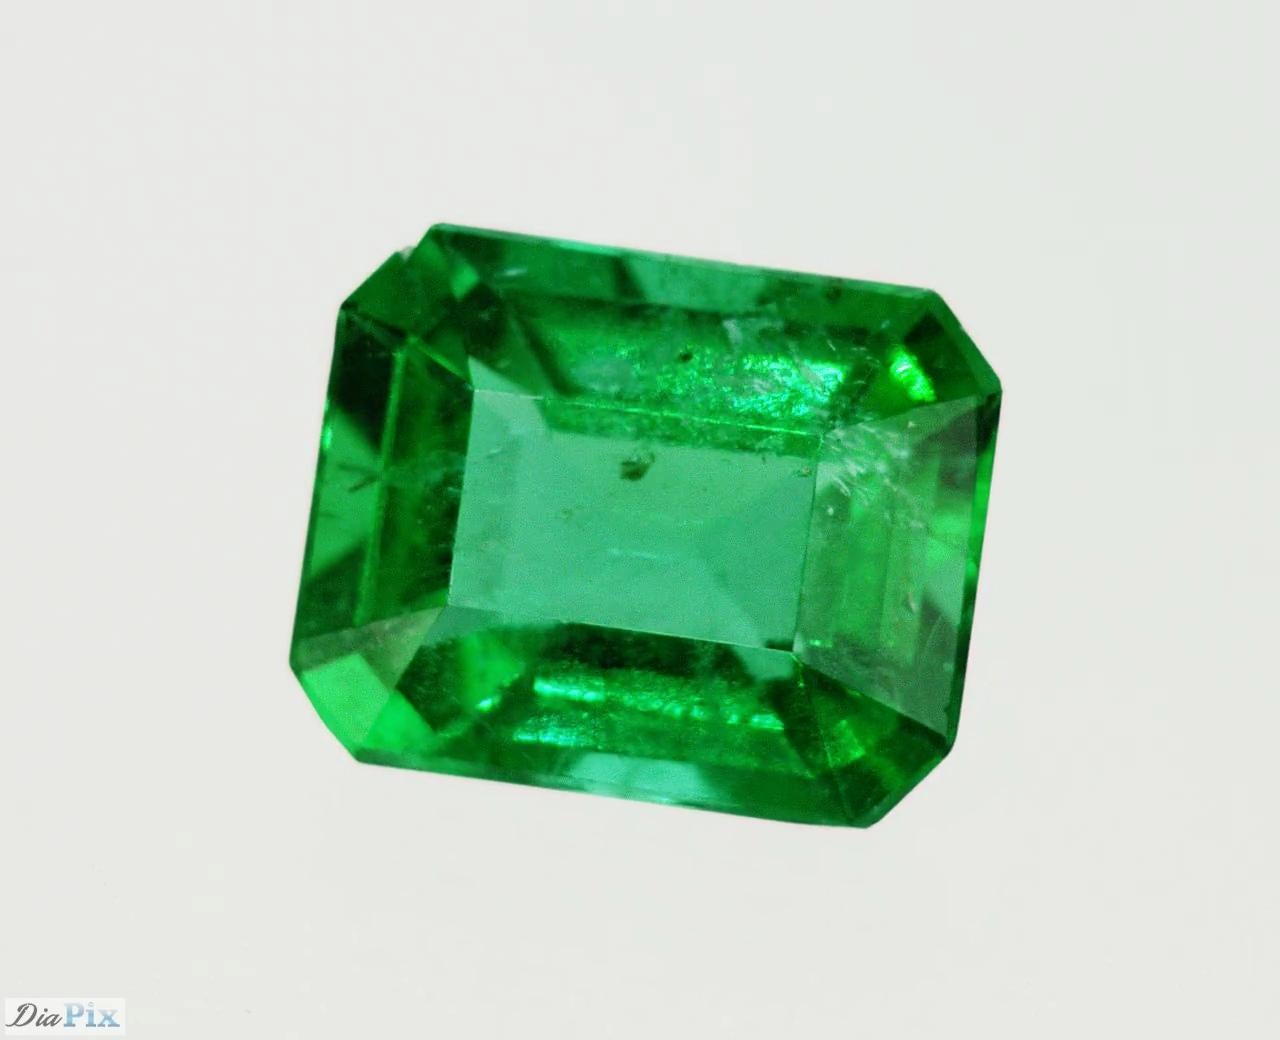 Emeralds are naturally porous and inclusive stones, with surface reaching fractures and in order to improve its clarity, it is a common and widely accepted practice in the industry to fill those fractures with oil or resin. Those materials are